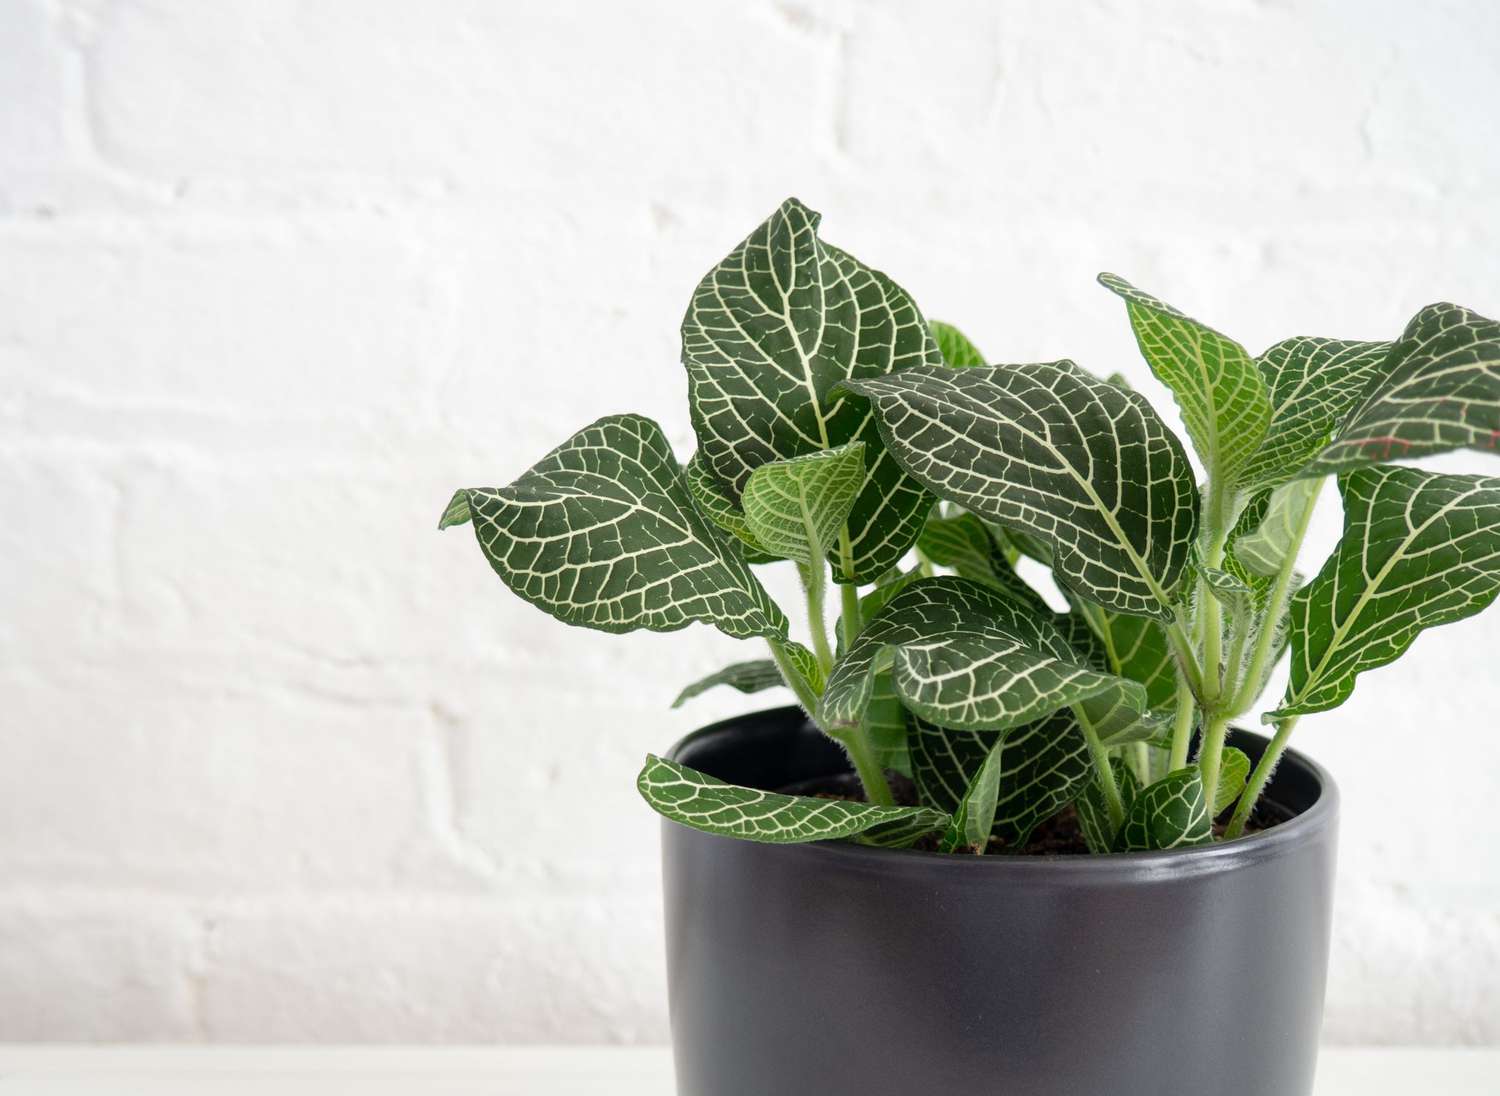 Nerve plant with striking white veins on deep green leaves in black pot